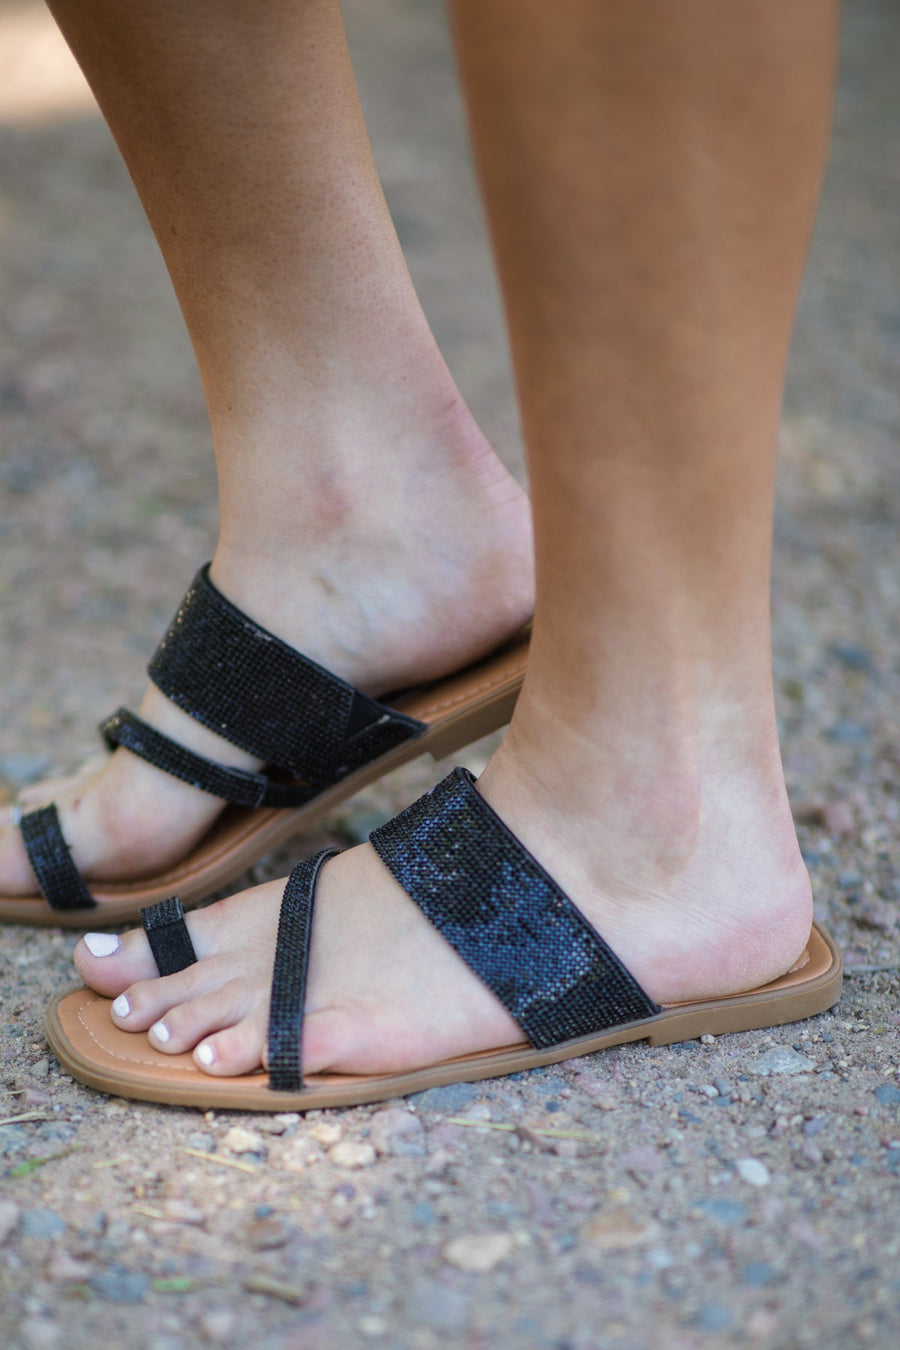 Black Rhinestone Sandals with Toe Strap - Filly Flair